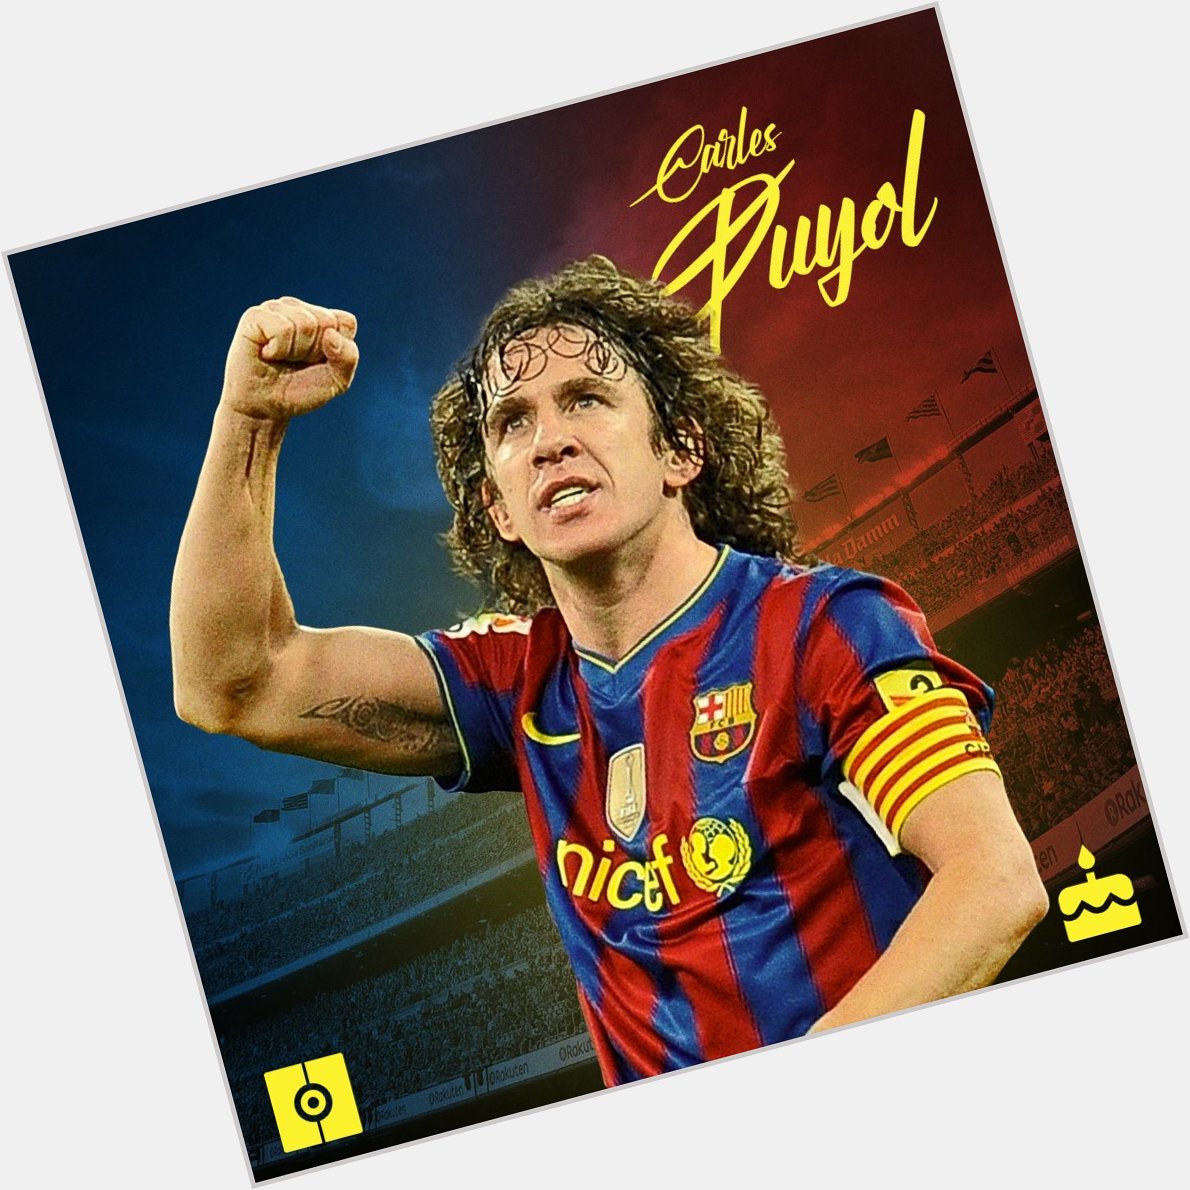 Happy birthday, Carles Puyol! The legend for both club and country turns 42 today  